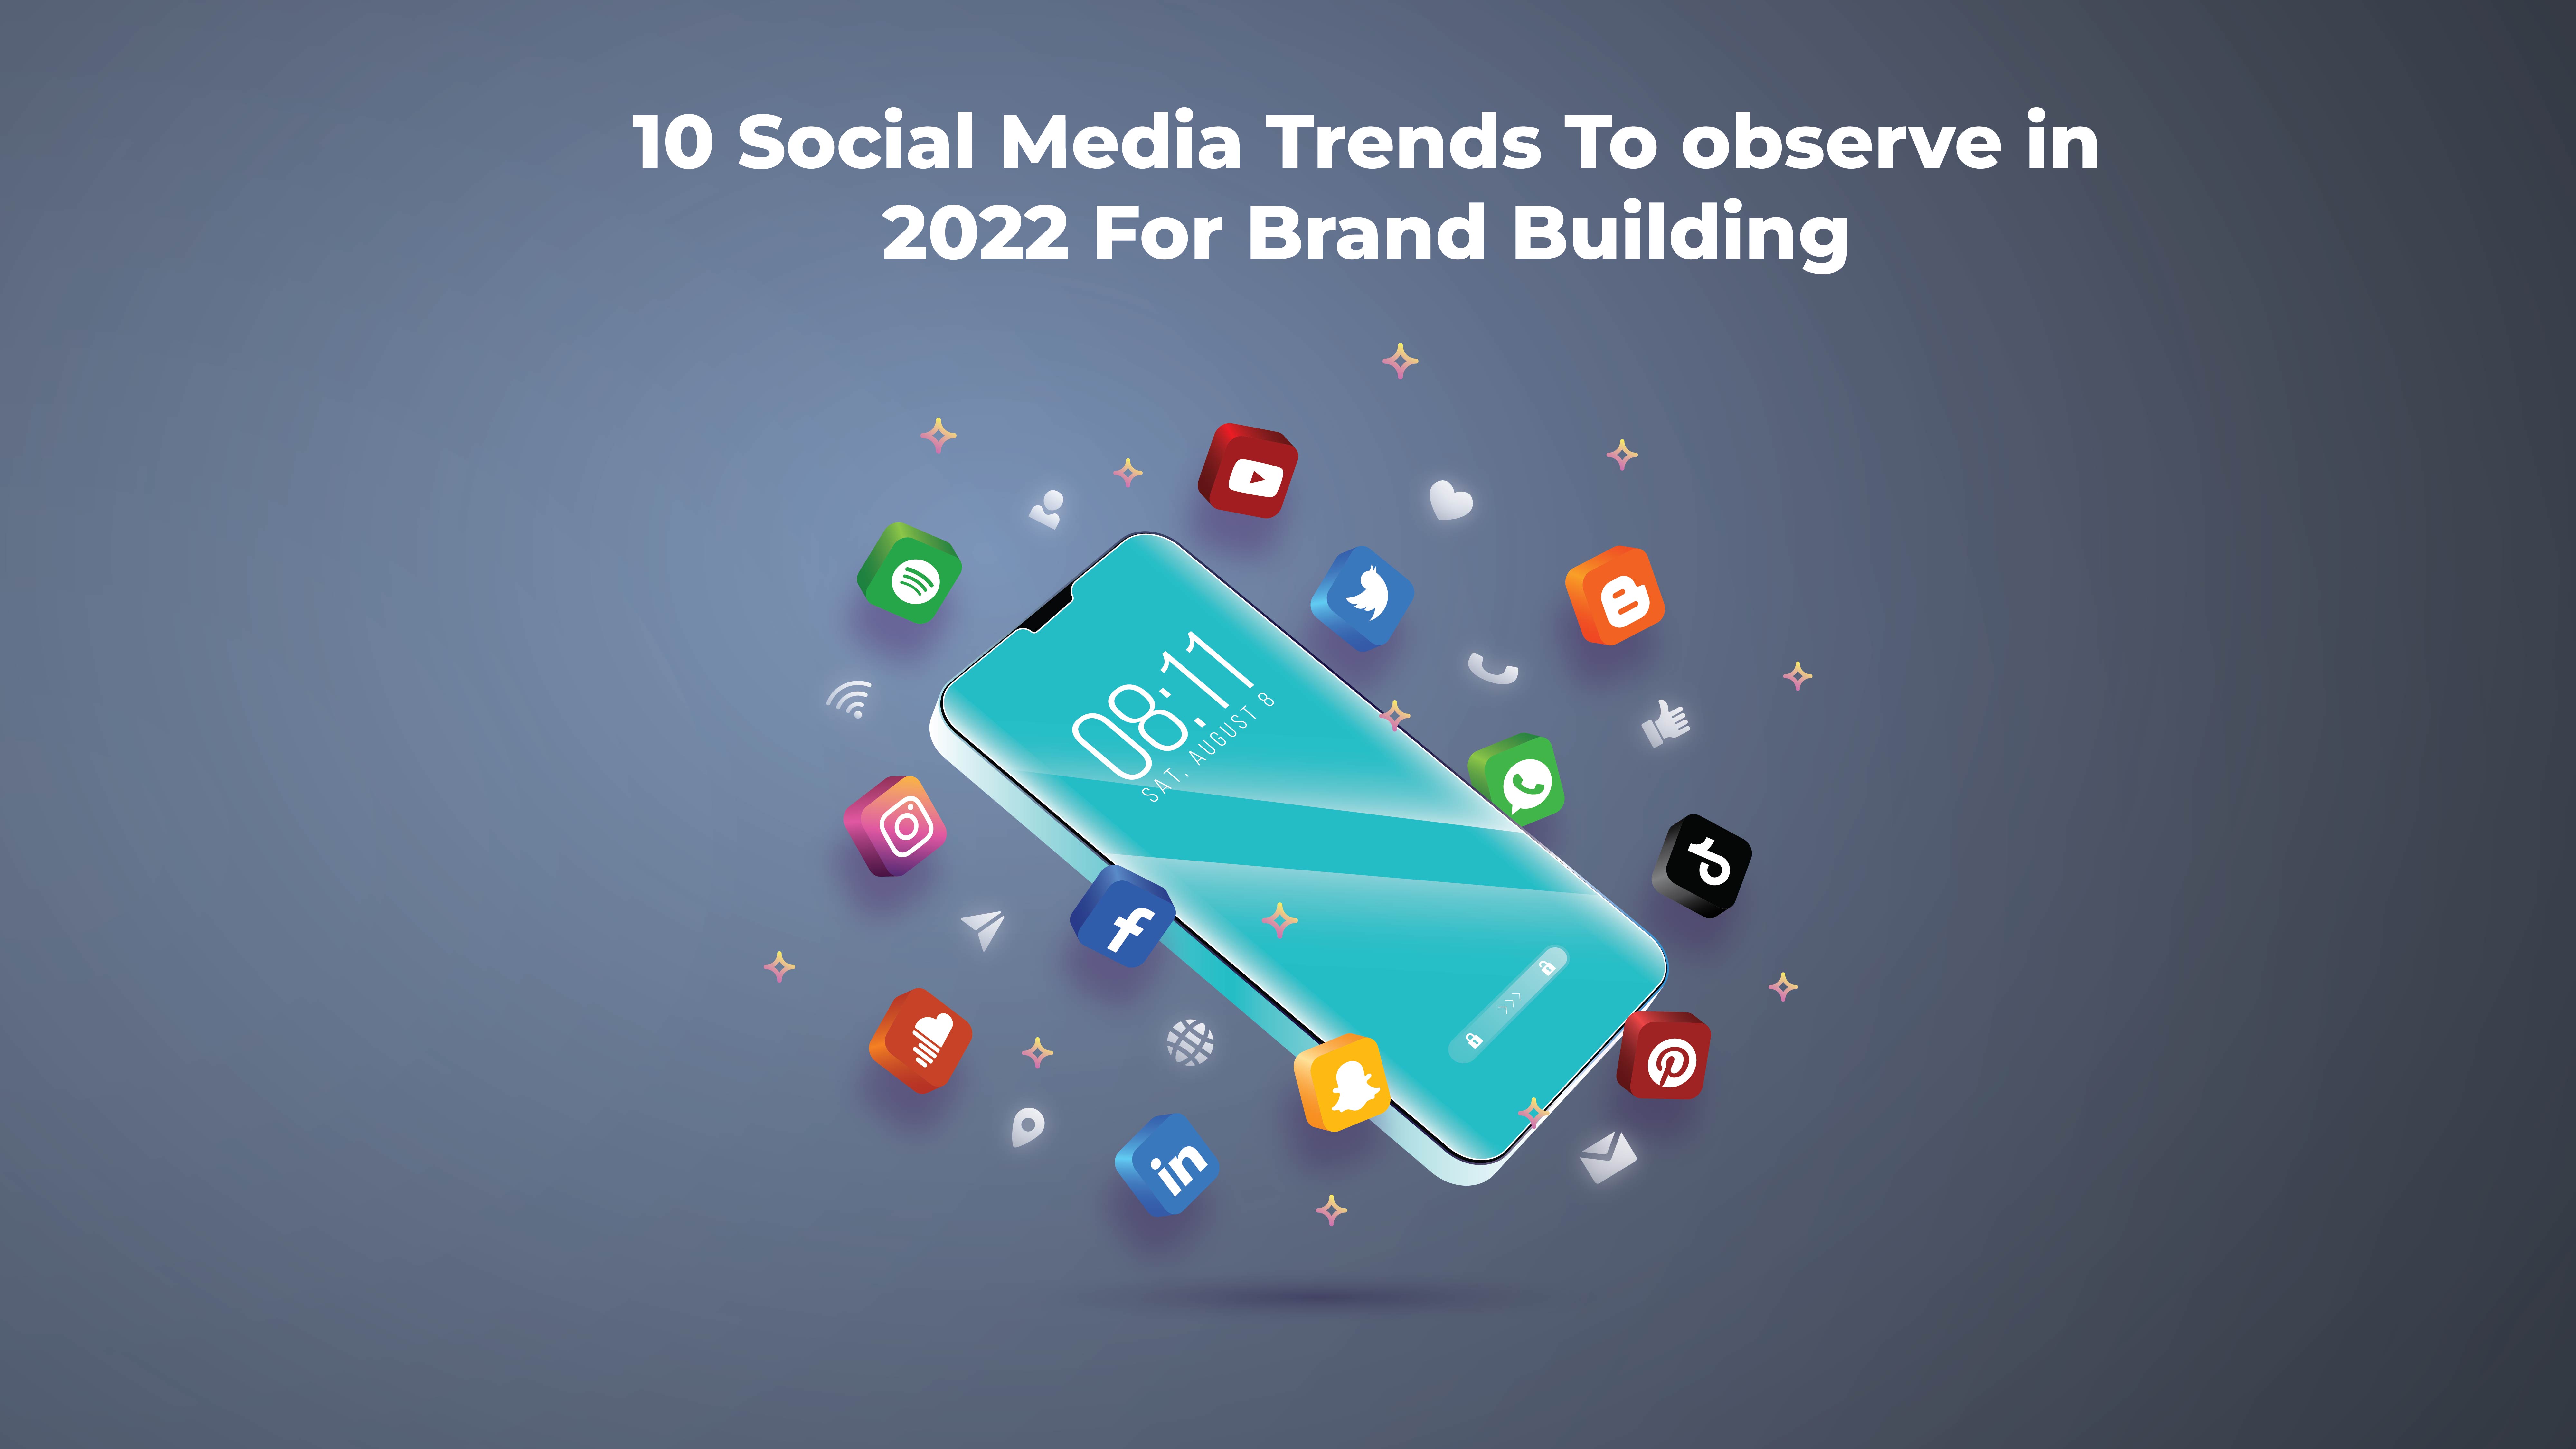 10 Social Media Trends To observe in 2022 For Brand Building - BrandEquity